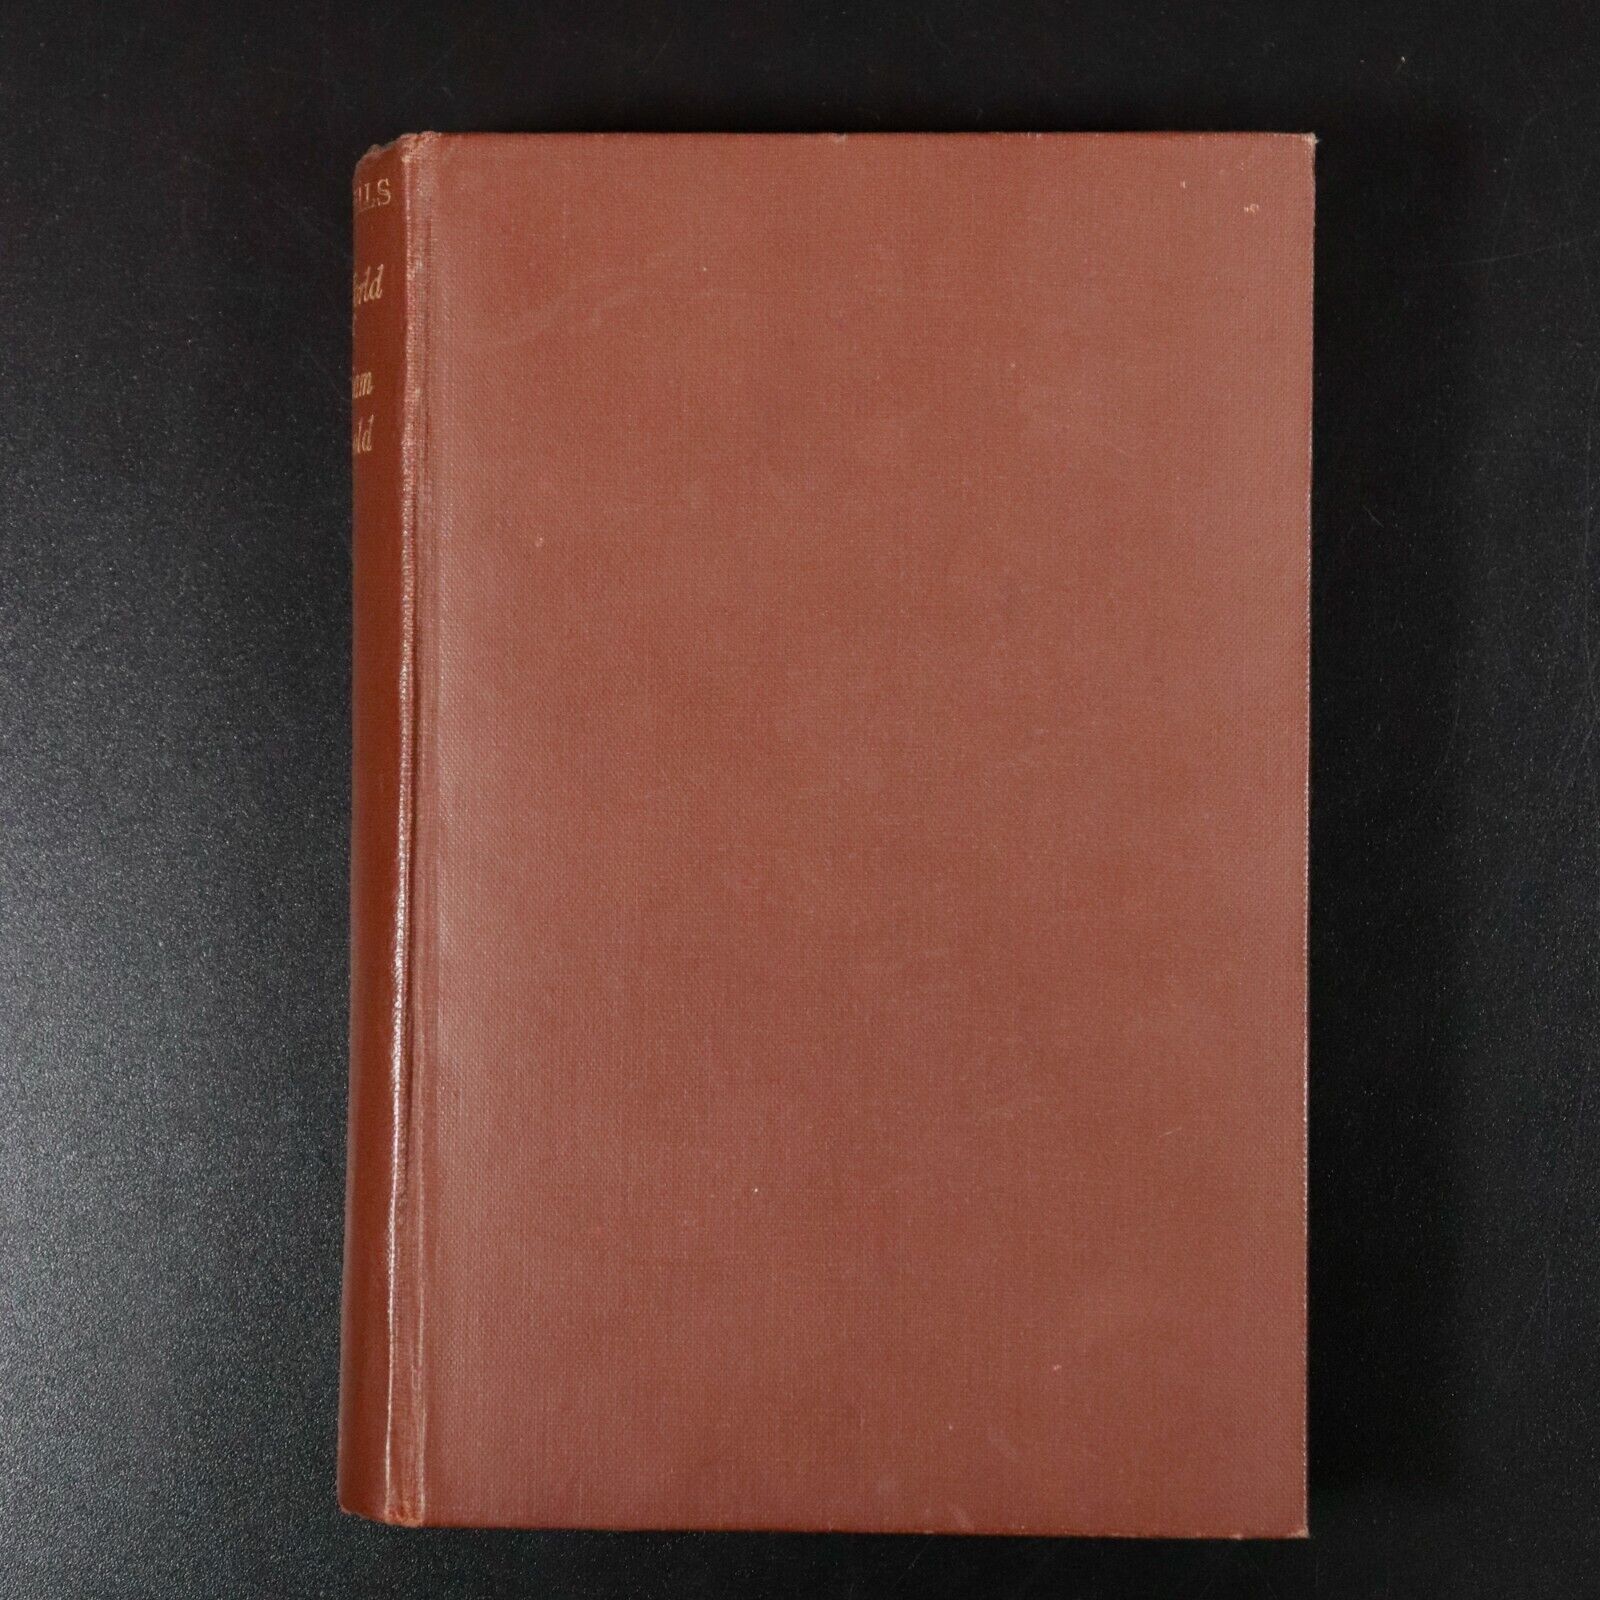 1926 The World Of William Clissold by H.G. Wells Antique Fiction Book Vol 1